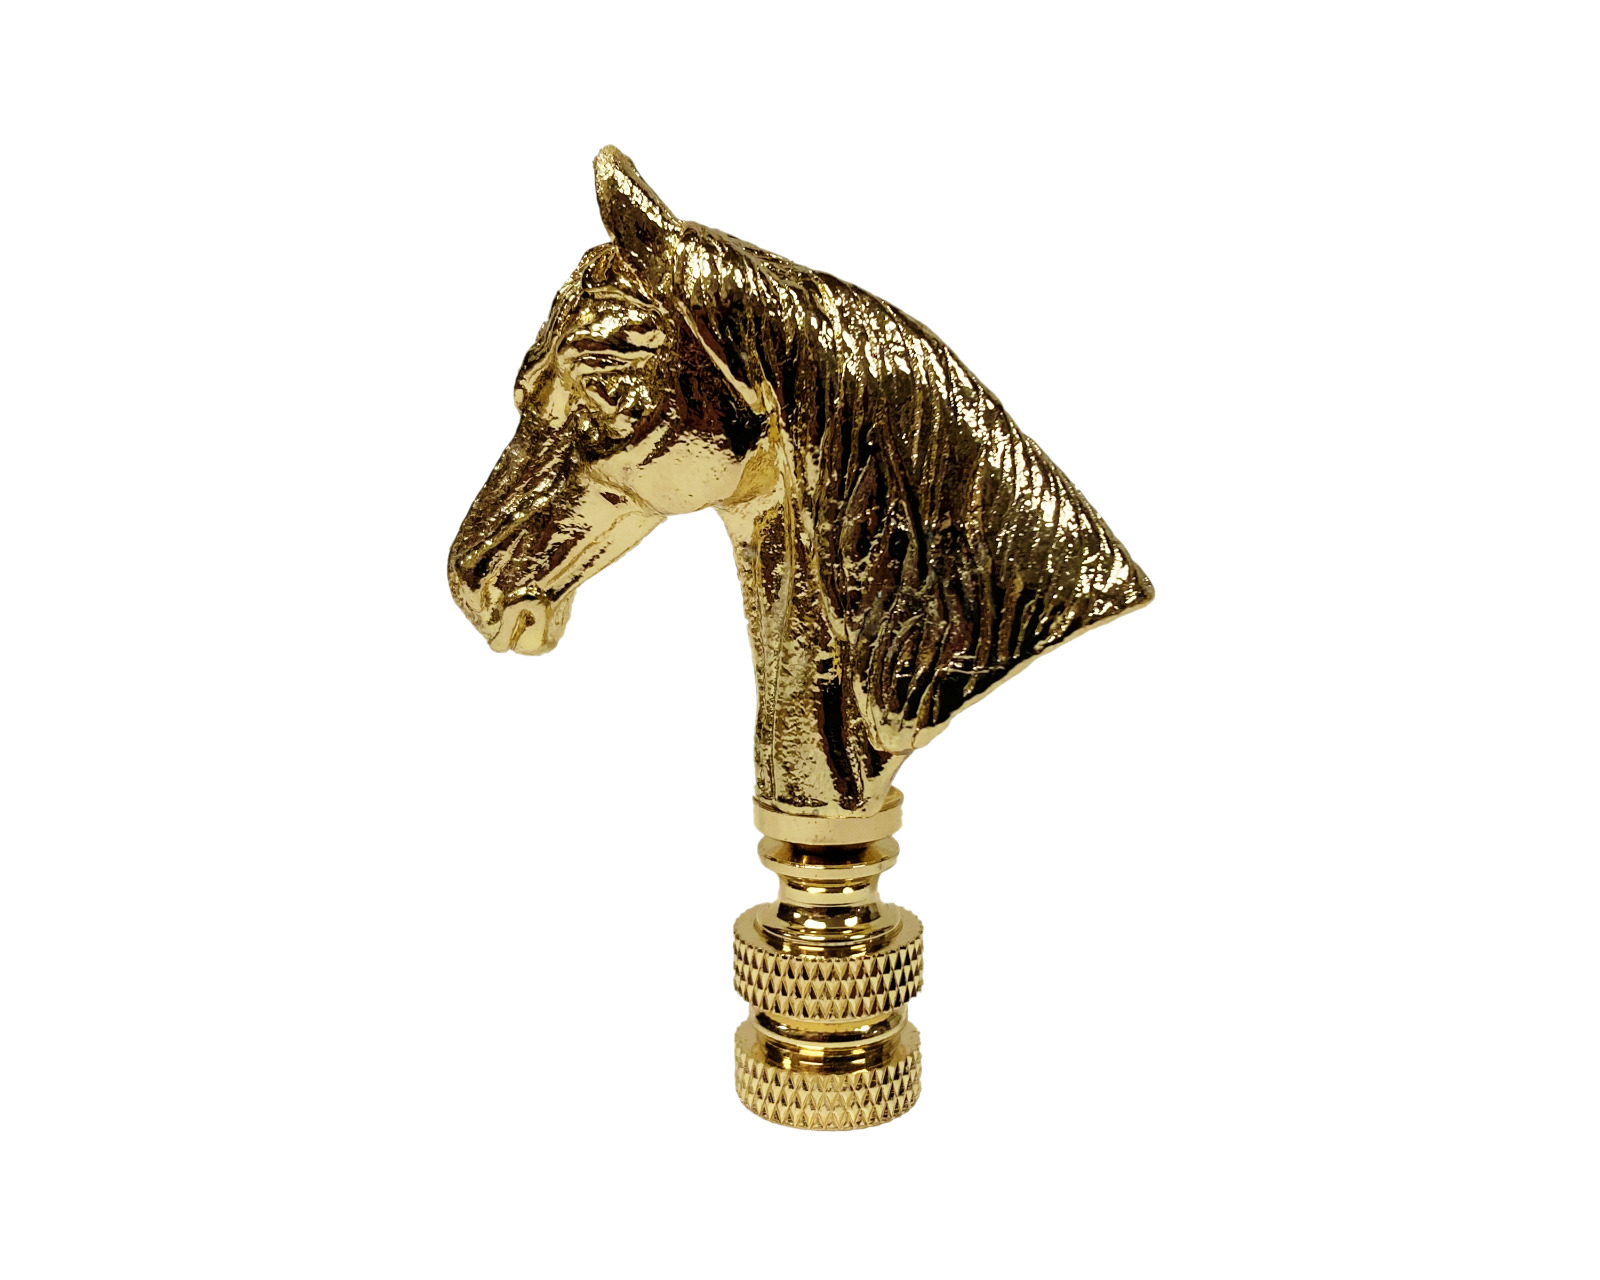 Lamp Finial-HORSE HEAD-Polished Brass Finish, Highly detailed metal casting